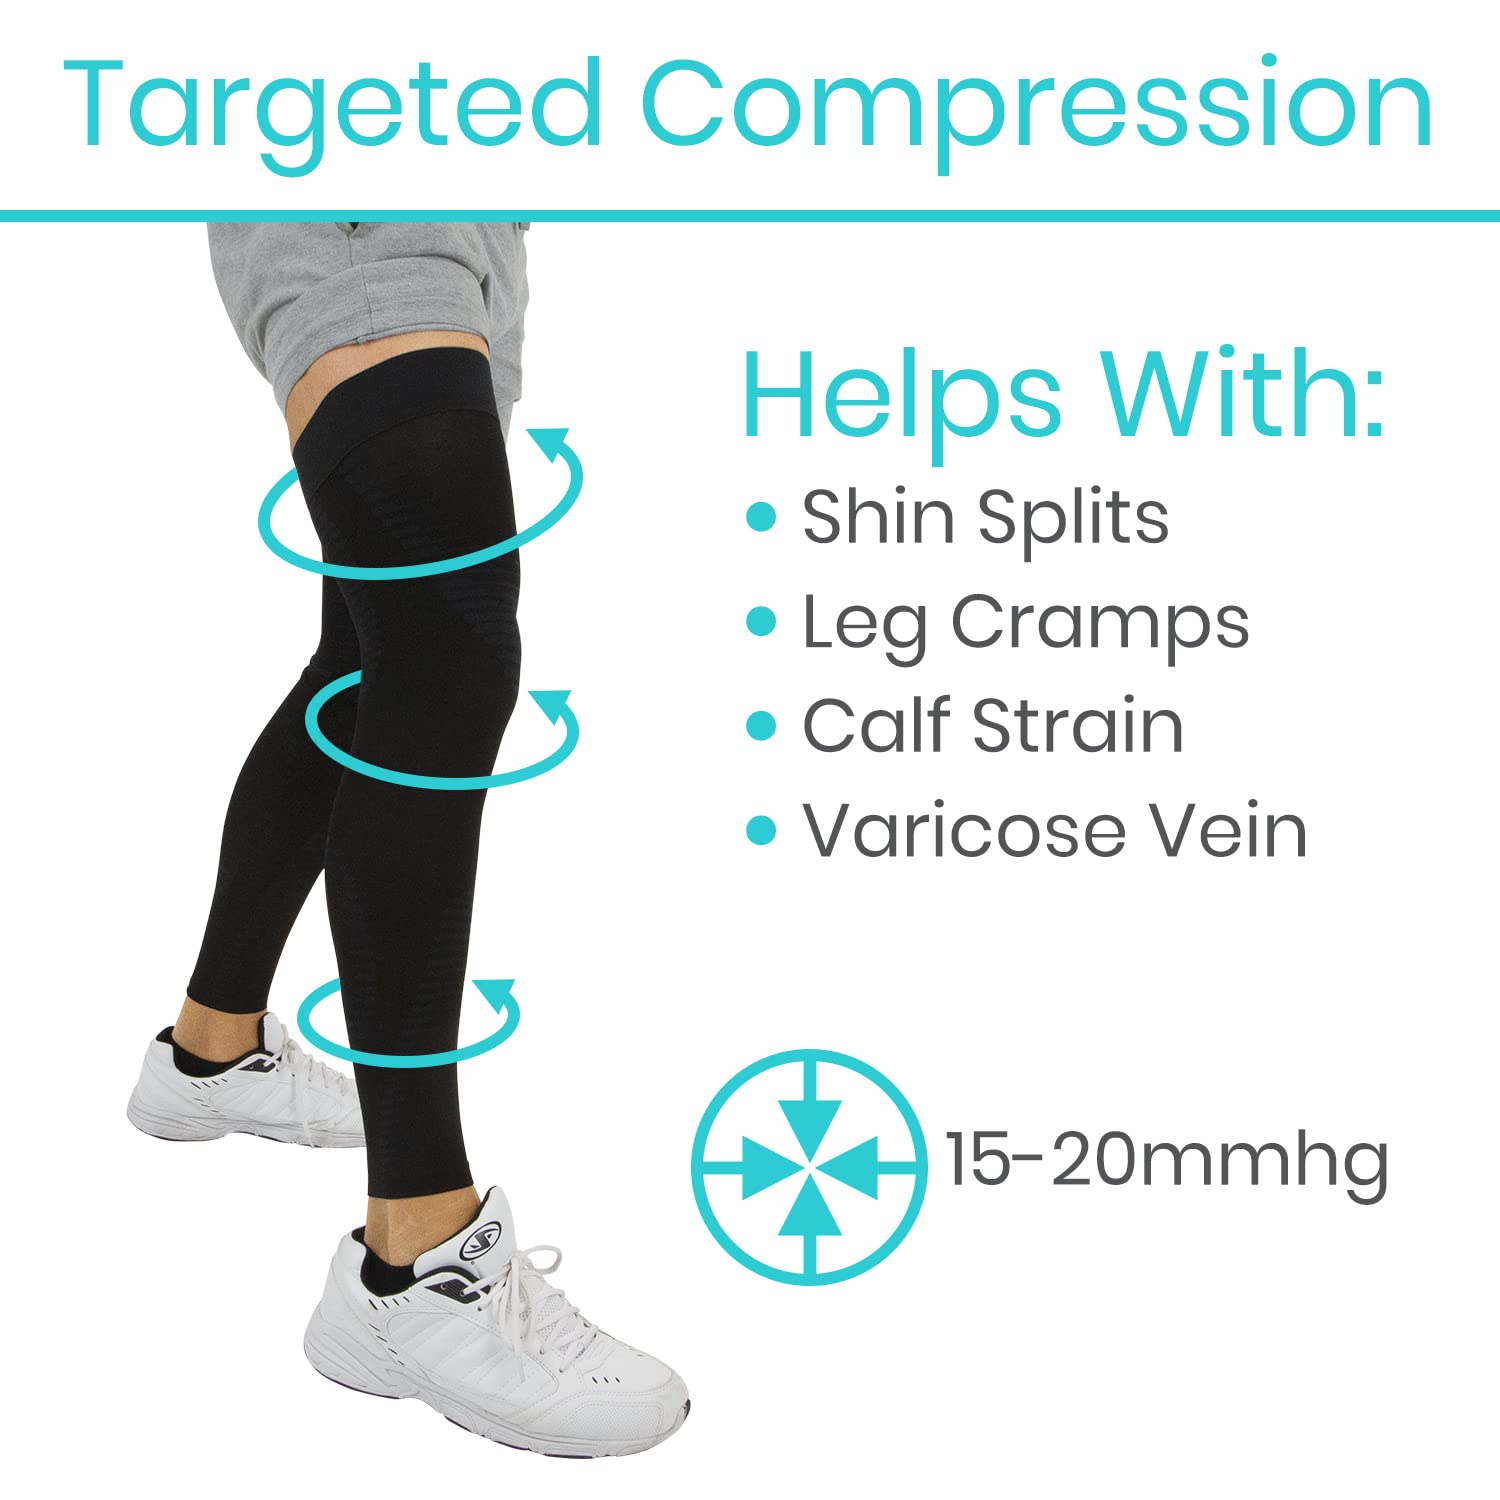 Full Leg Compression Sleeves for Men & Women (Pair) - Knee, Calf, & Thigh Support Brace Wrap for Basketball, Football, Wrestling - Footless Long Running Accessories for Shin Splints